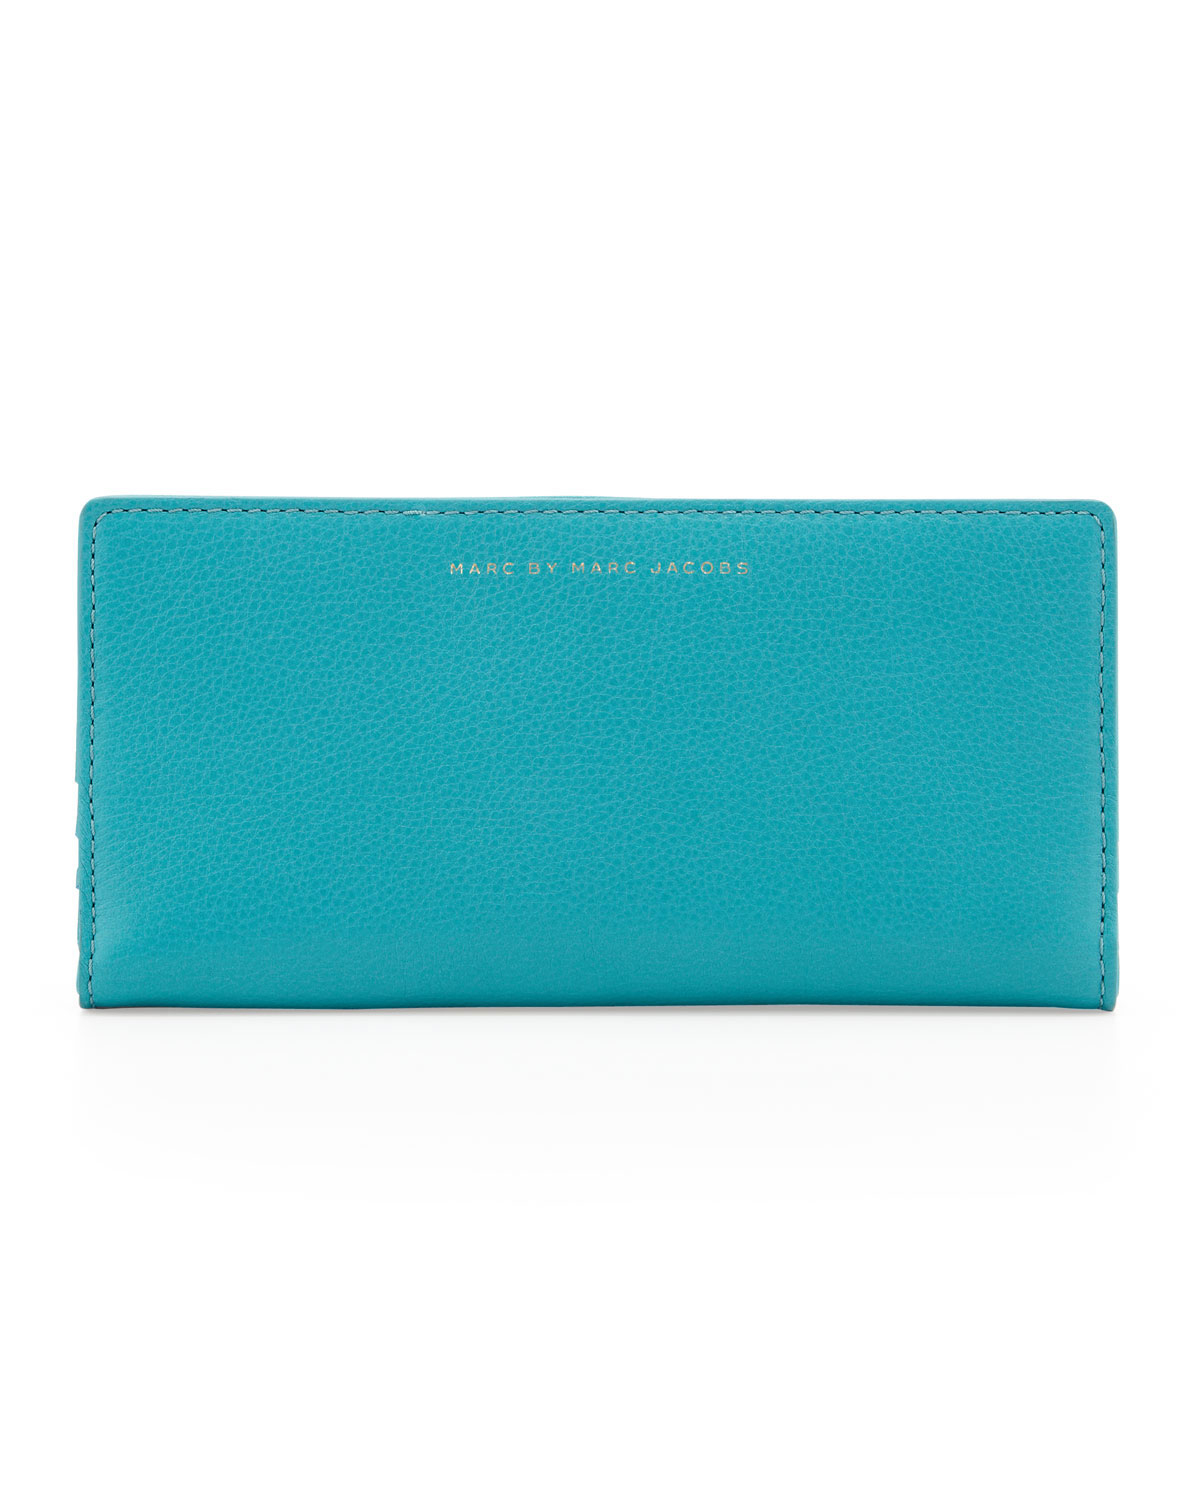 Lyst - Marc By Marc Jacobs Sophisticated Slim Wallet Teal in Blue